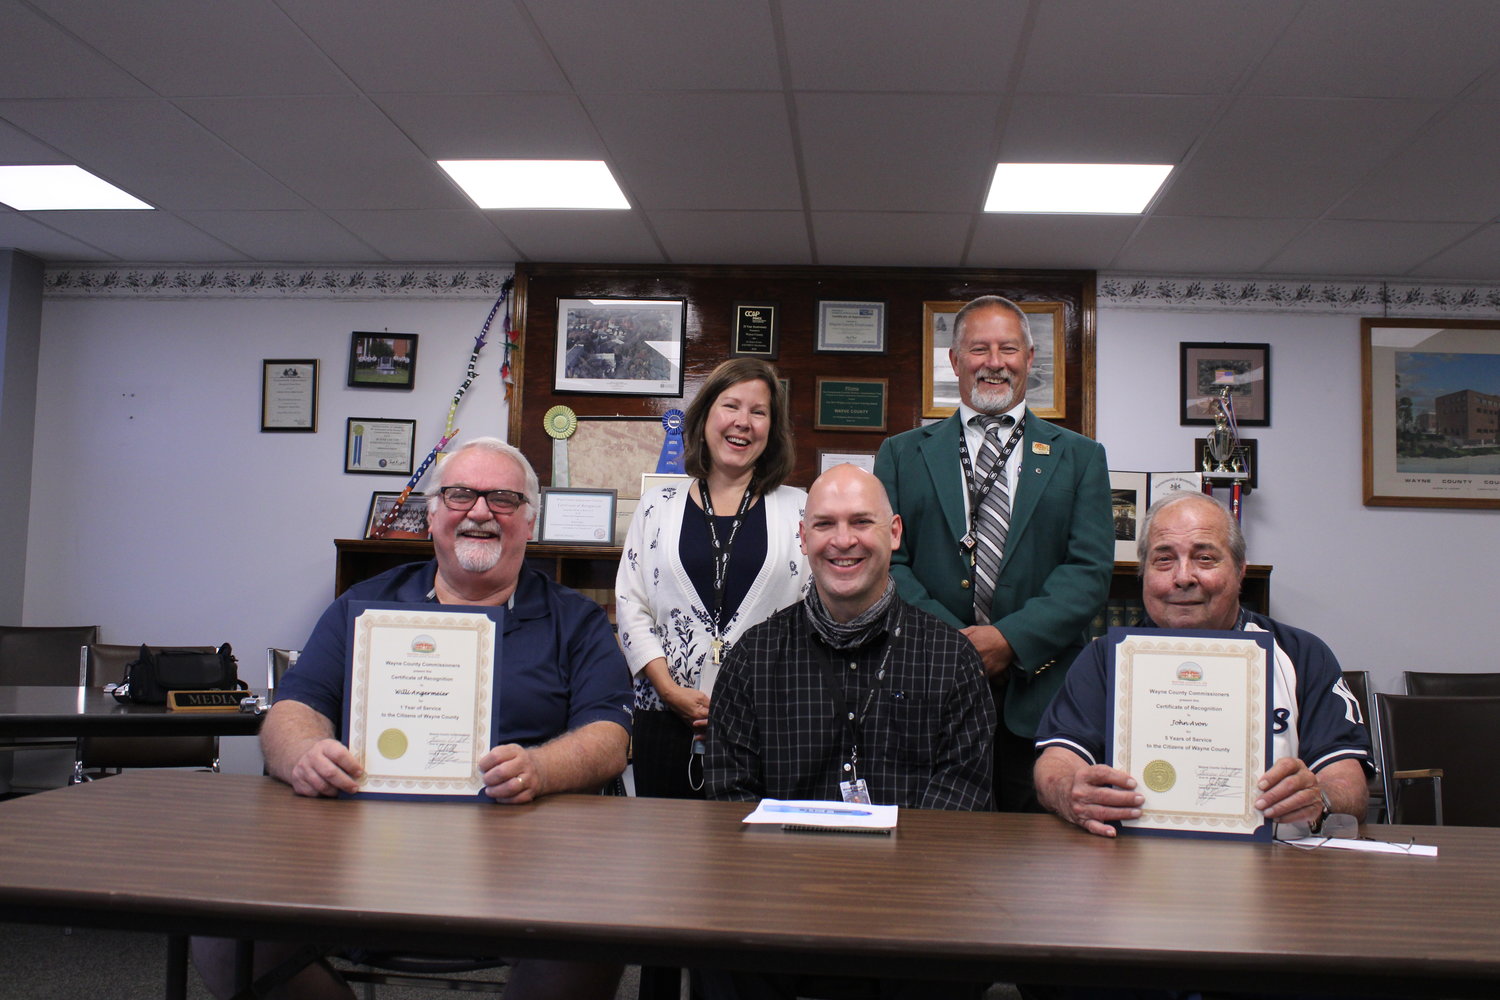 Willi Angermeier, front left, Carl Albright, front middle, Joh Avon, front right. Commissioner Jocelyn Cramer, back left, Commissioner Brian Smith, back right.